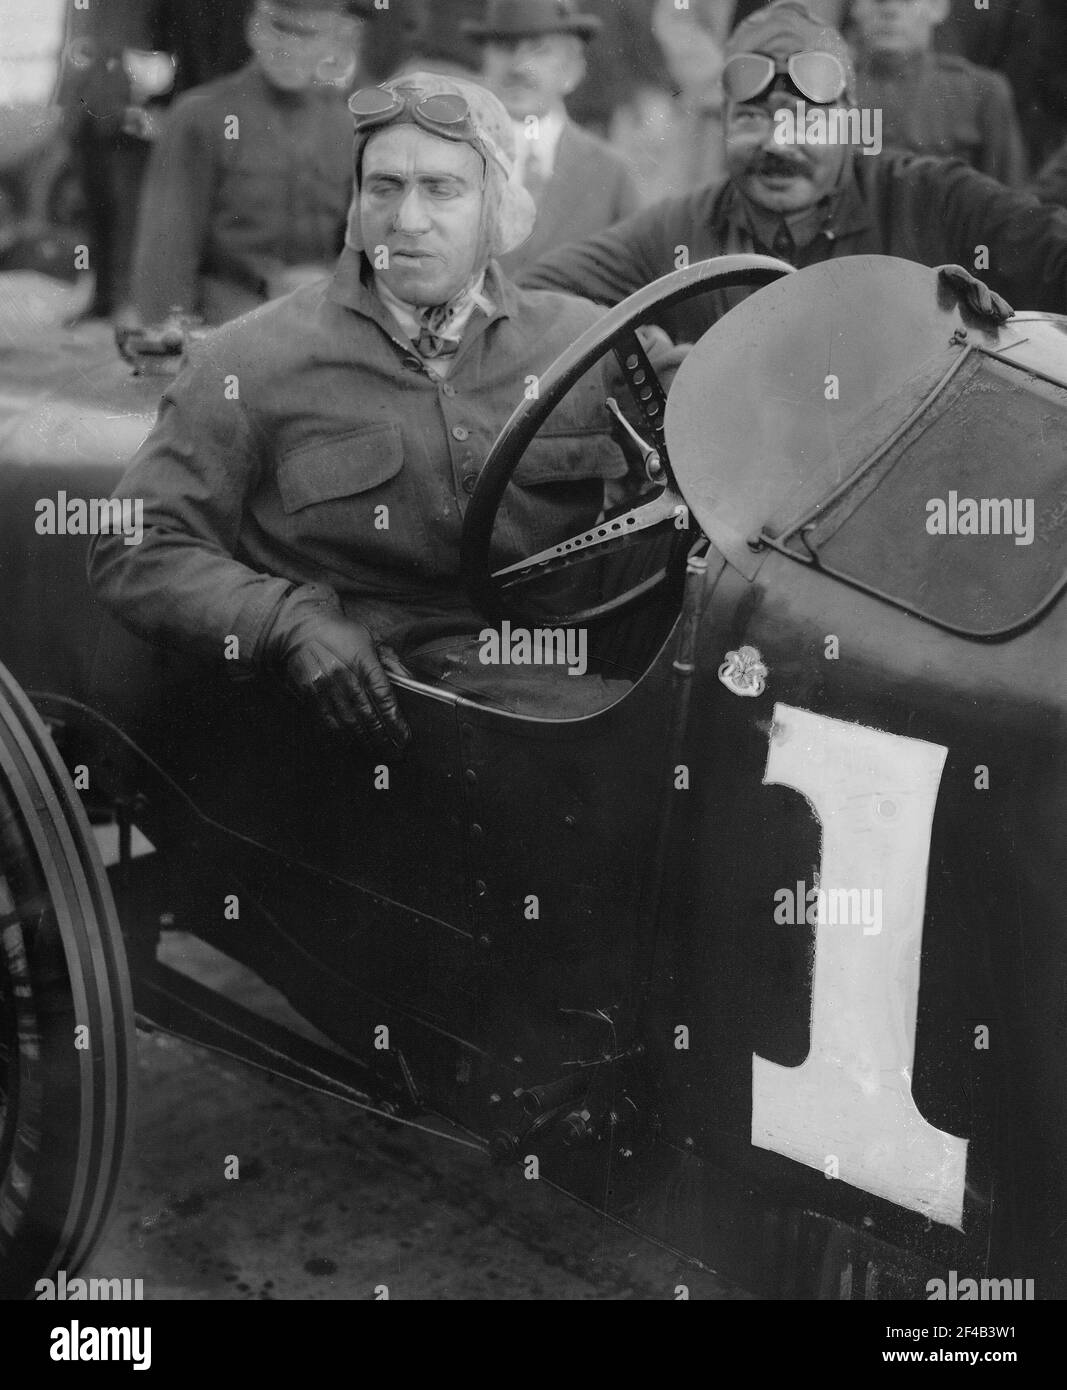 Dario Resta (1882-1924), an Italian-British racecar driver who came in a close second at the 1915 Indianapolis 500 Stock Photo